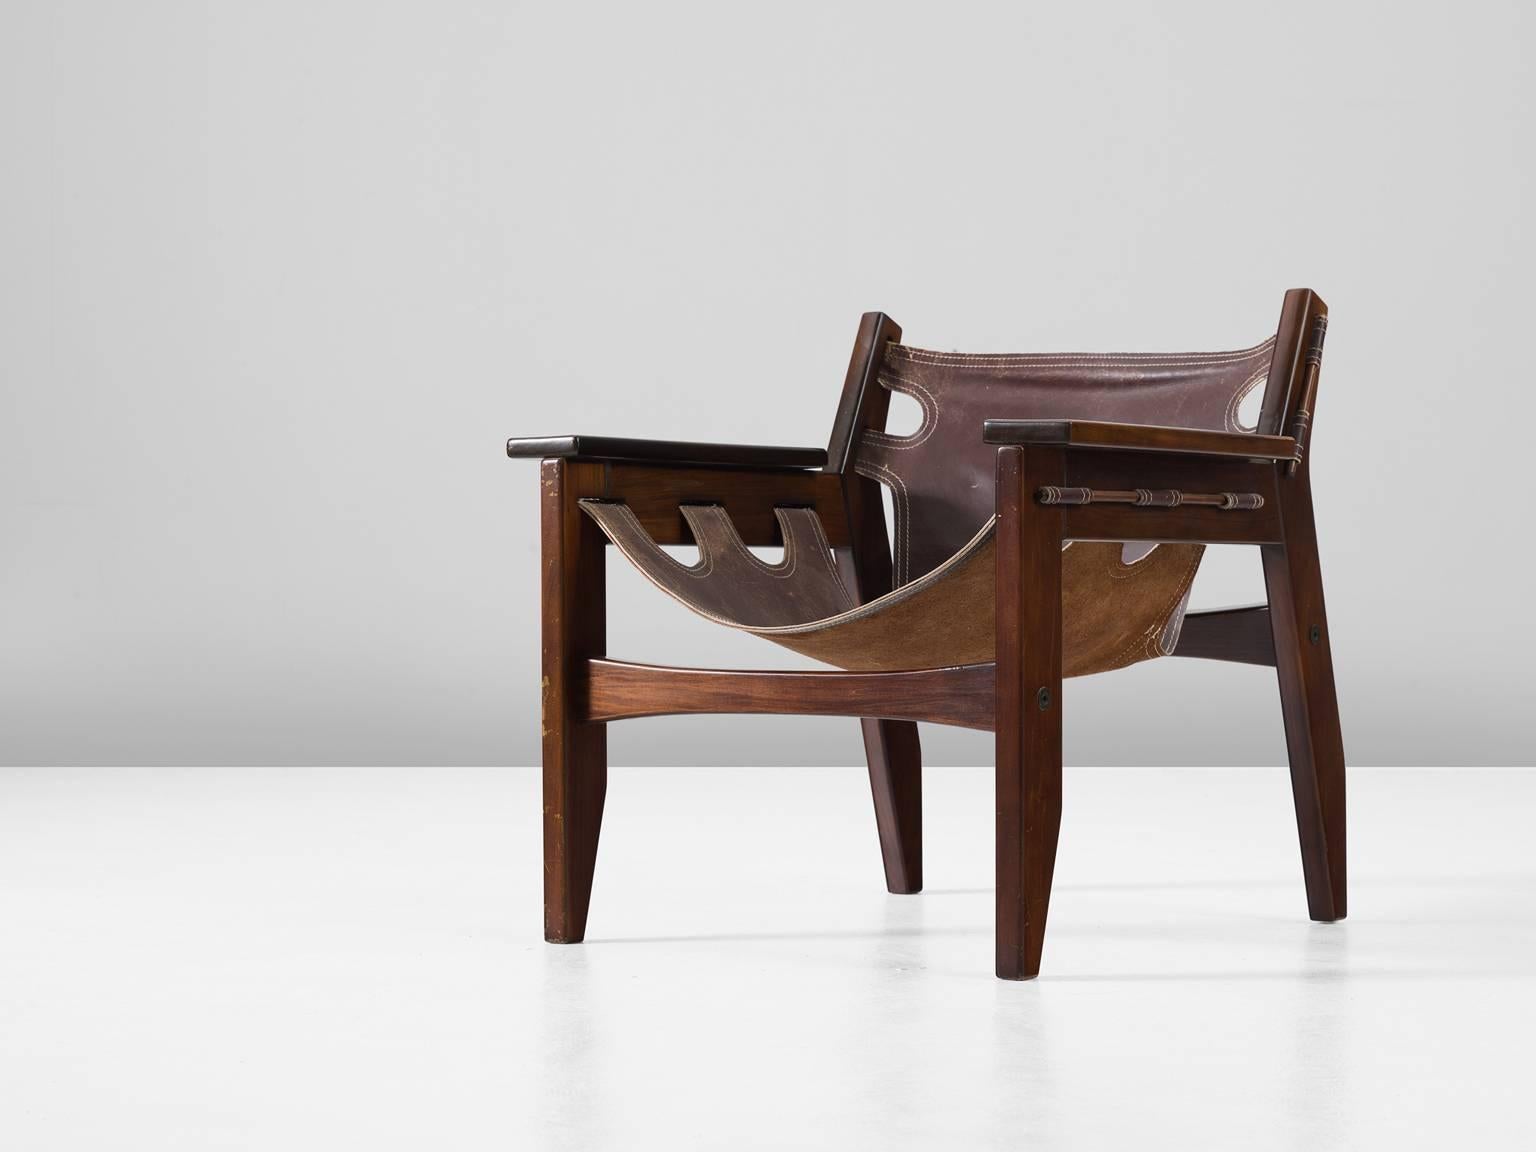 'Kilin' armchair, in rosewood and leather by Sergio Rodrigues for OCA, Brazil, 1973. 

'Kilin' easy chair in Jacaranda rosewood and brown leather. This chair has a sturdy appearance and is designed with high attention to detail. The thick saddle